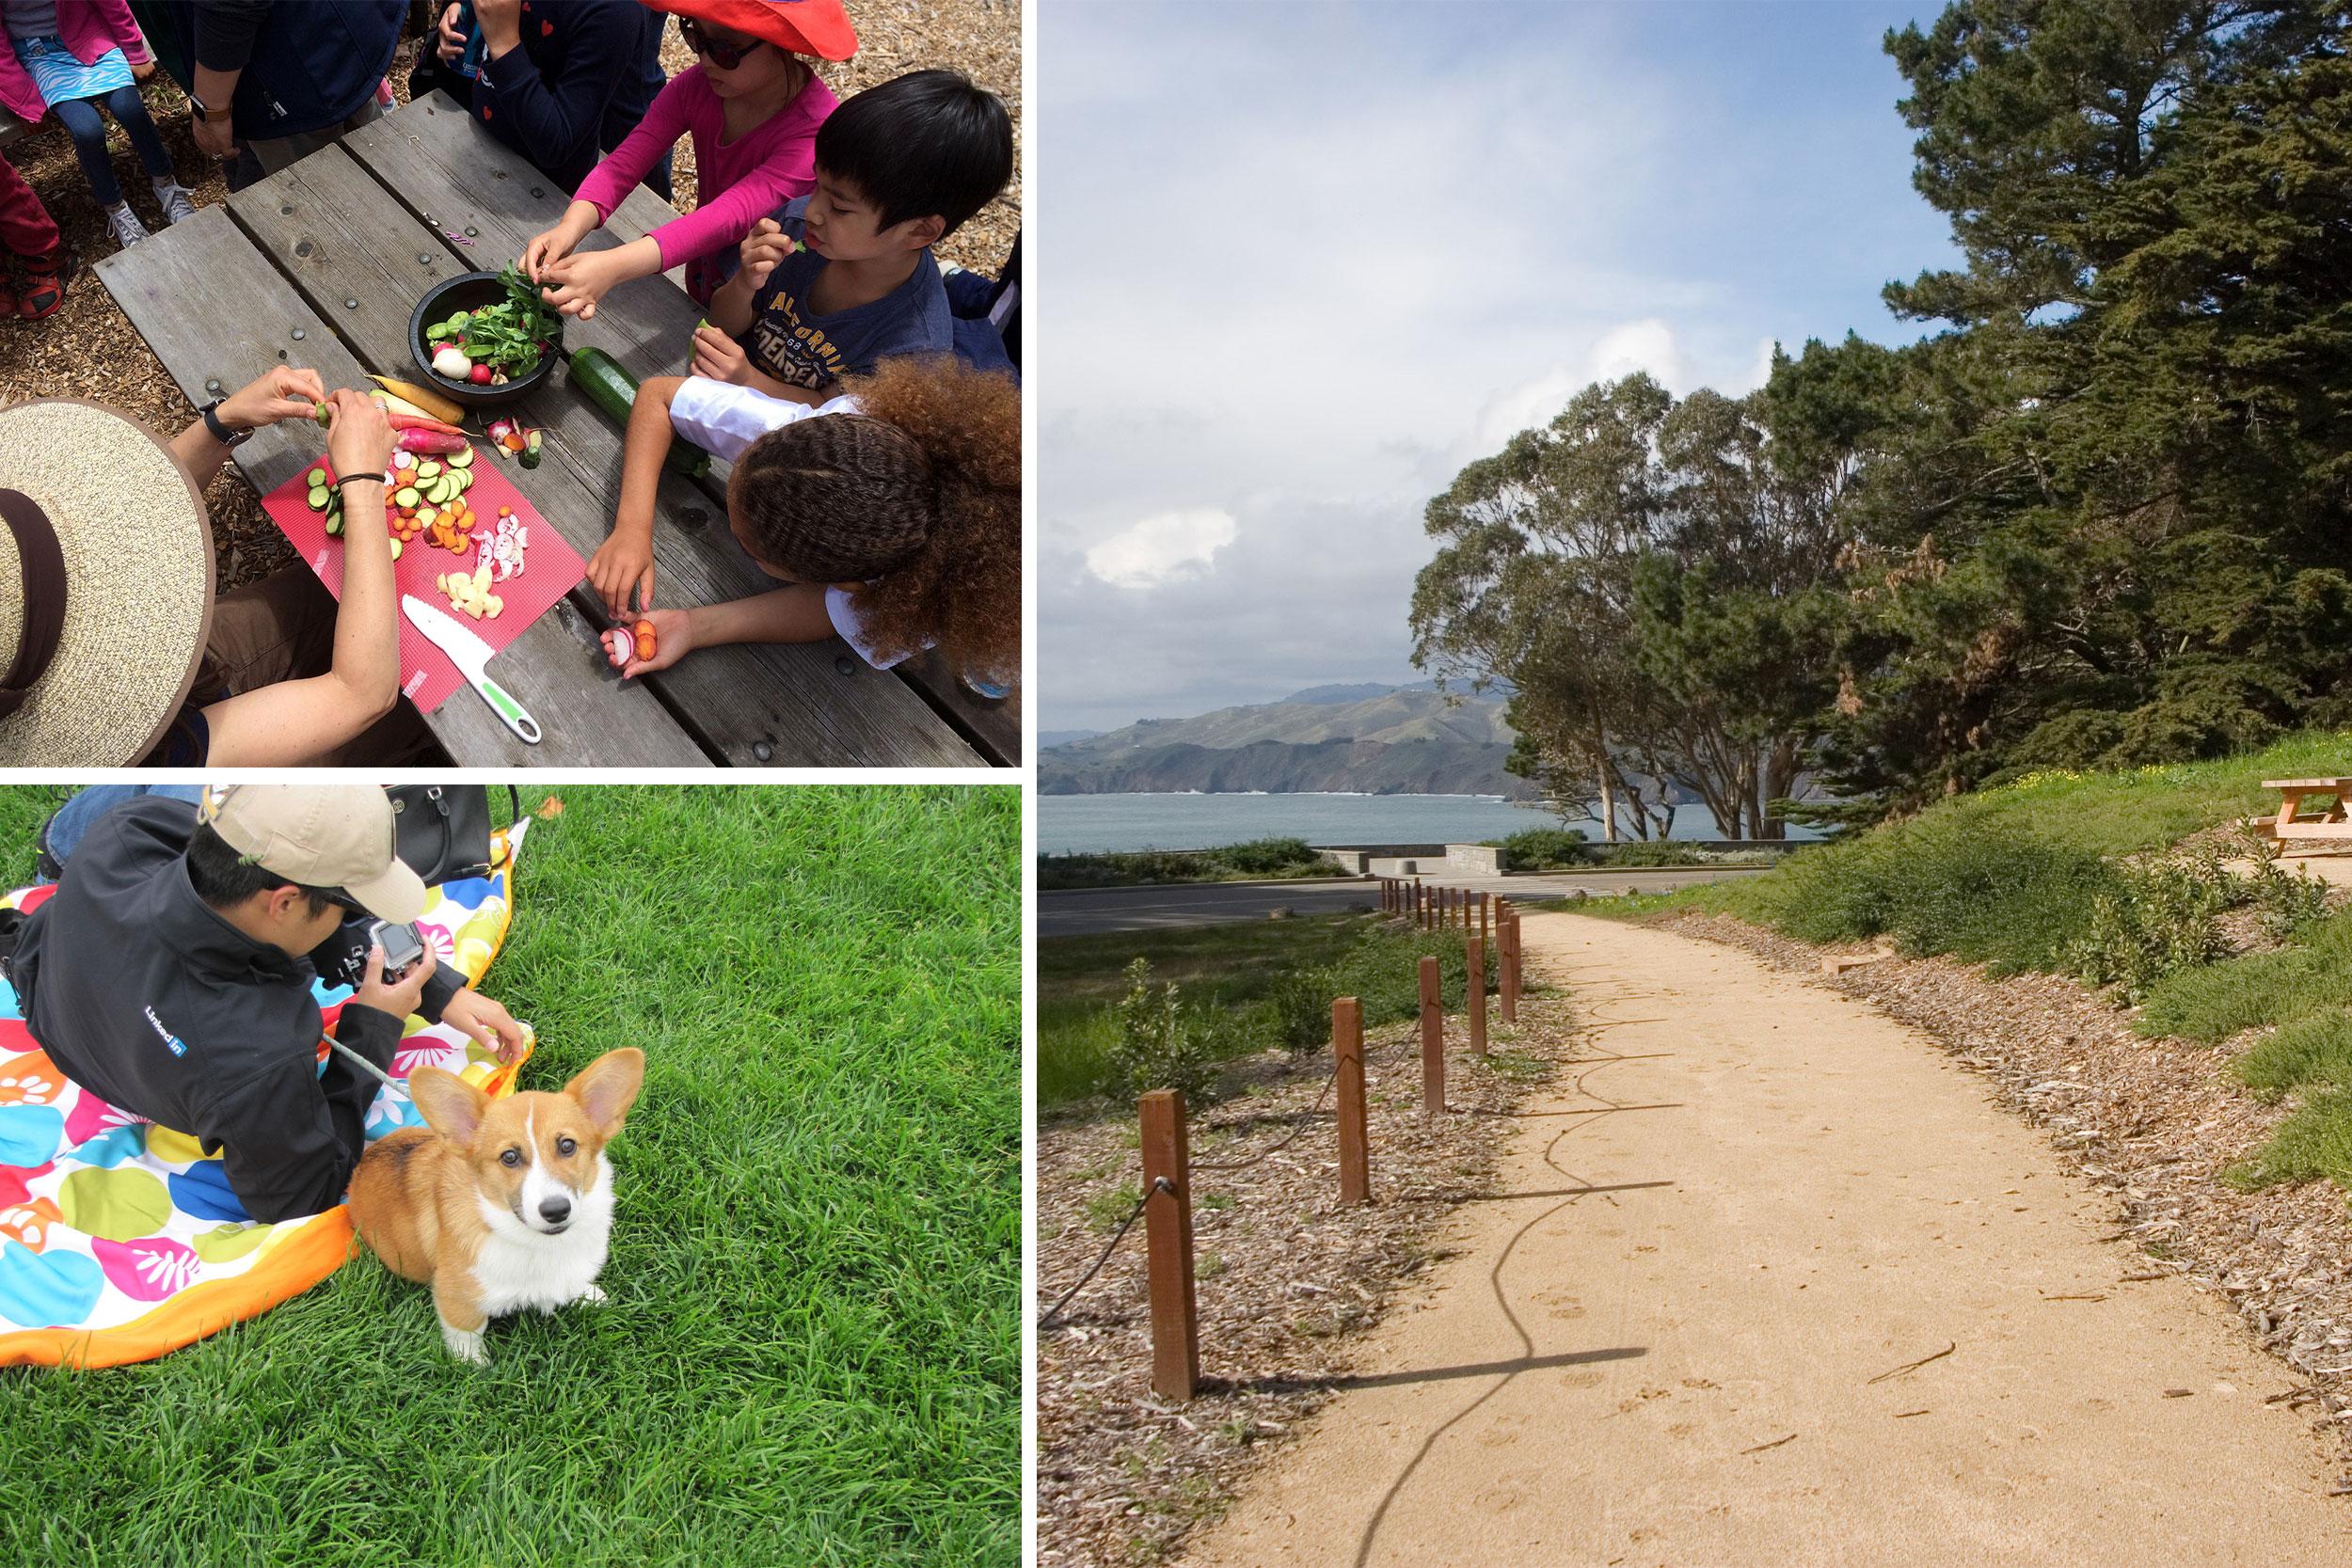 Top left: adult slicing vegetables for group of kids to snack. Bottom left: man with corgi on picnic blanket on lawn. Right: trail path with picnic tables on the right